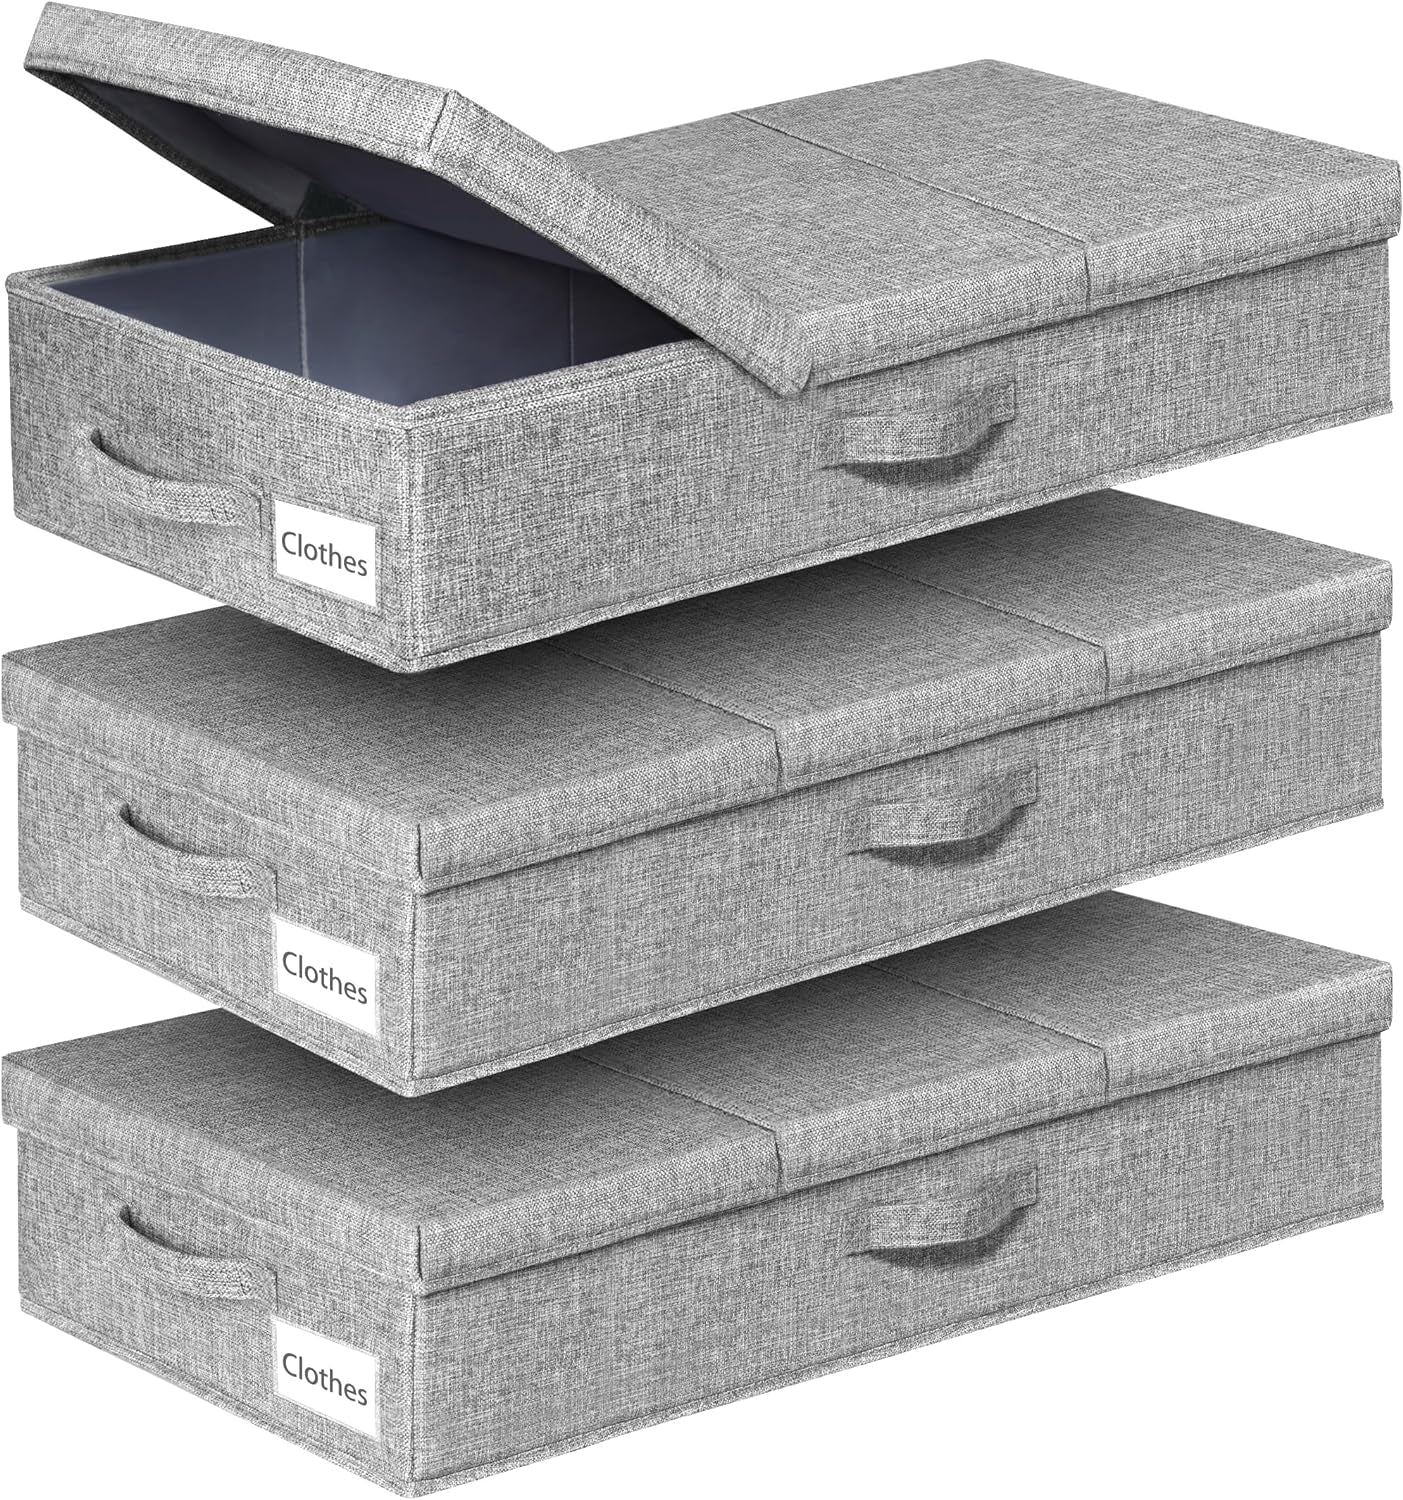 under the Bed Storage Containers 6 Inch High, 2 Pack Flat Storage Bins with Lids, Large Clothes Storage Sturdy Structure, Apartment Storage Ideas, Home Organization Must Haves, Dark Grey